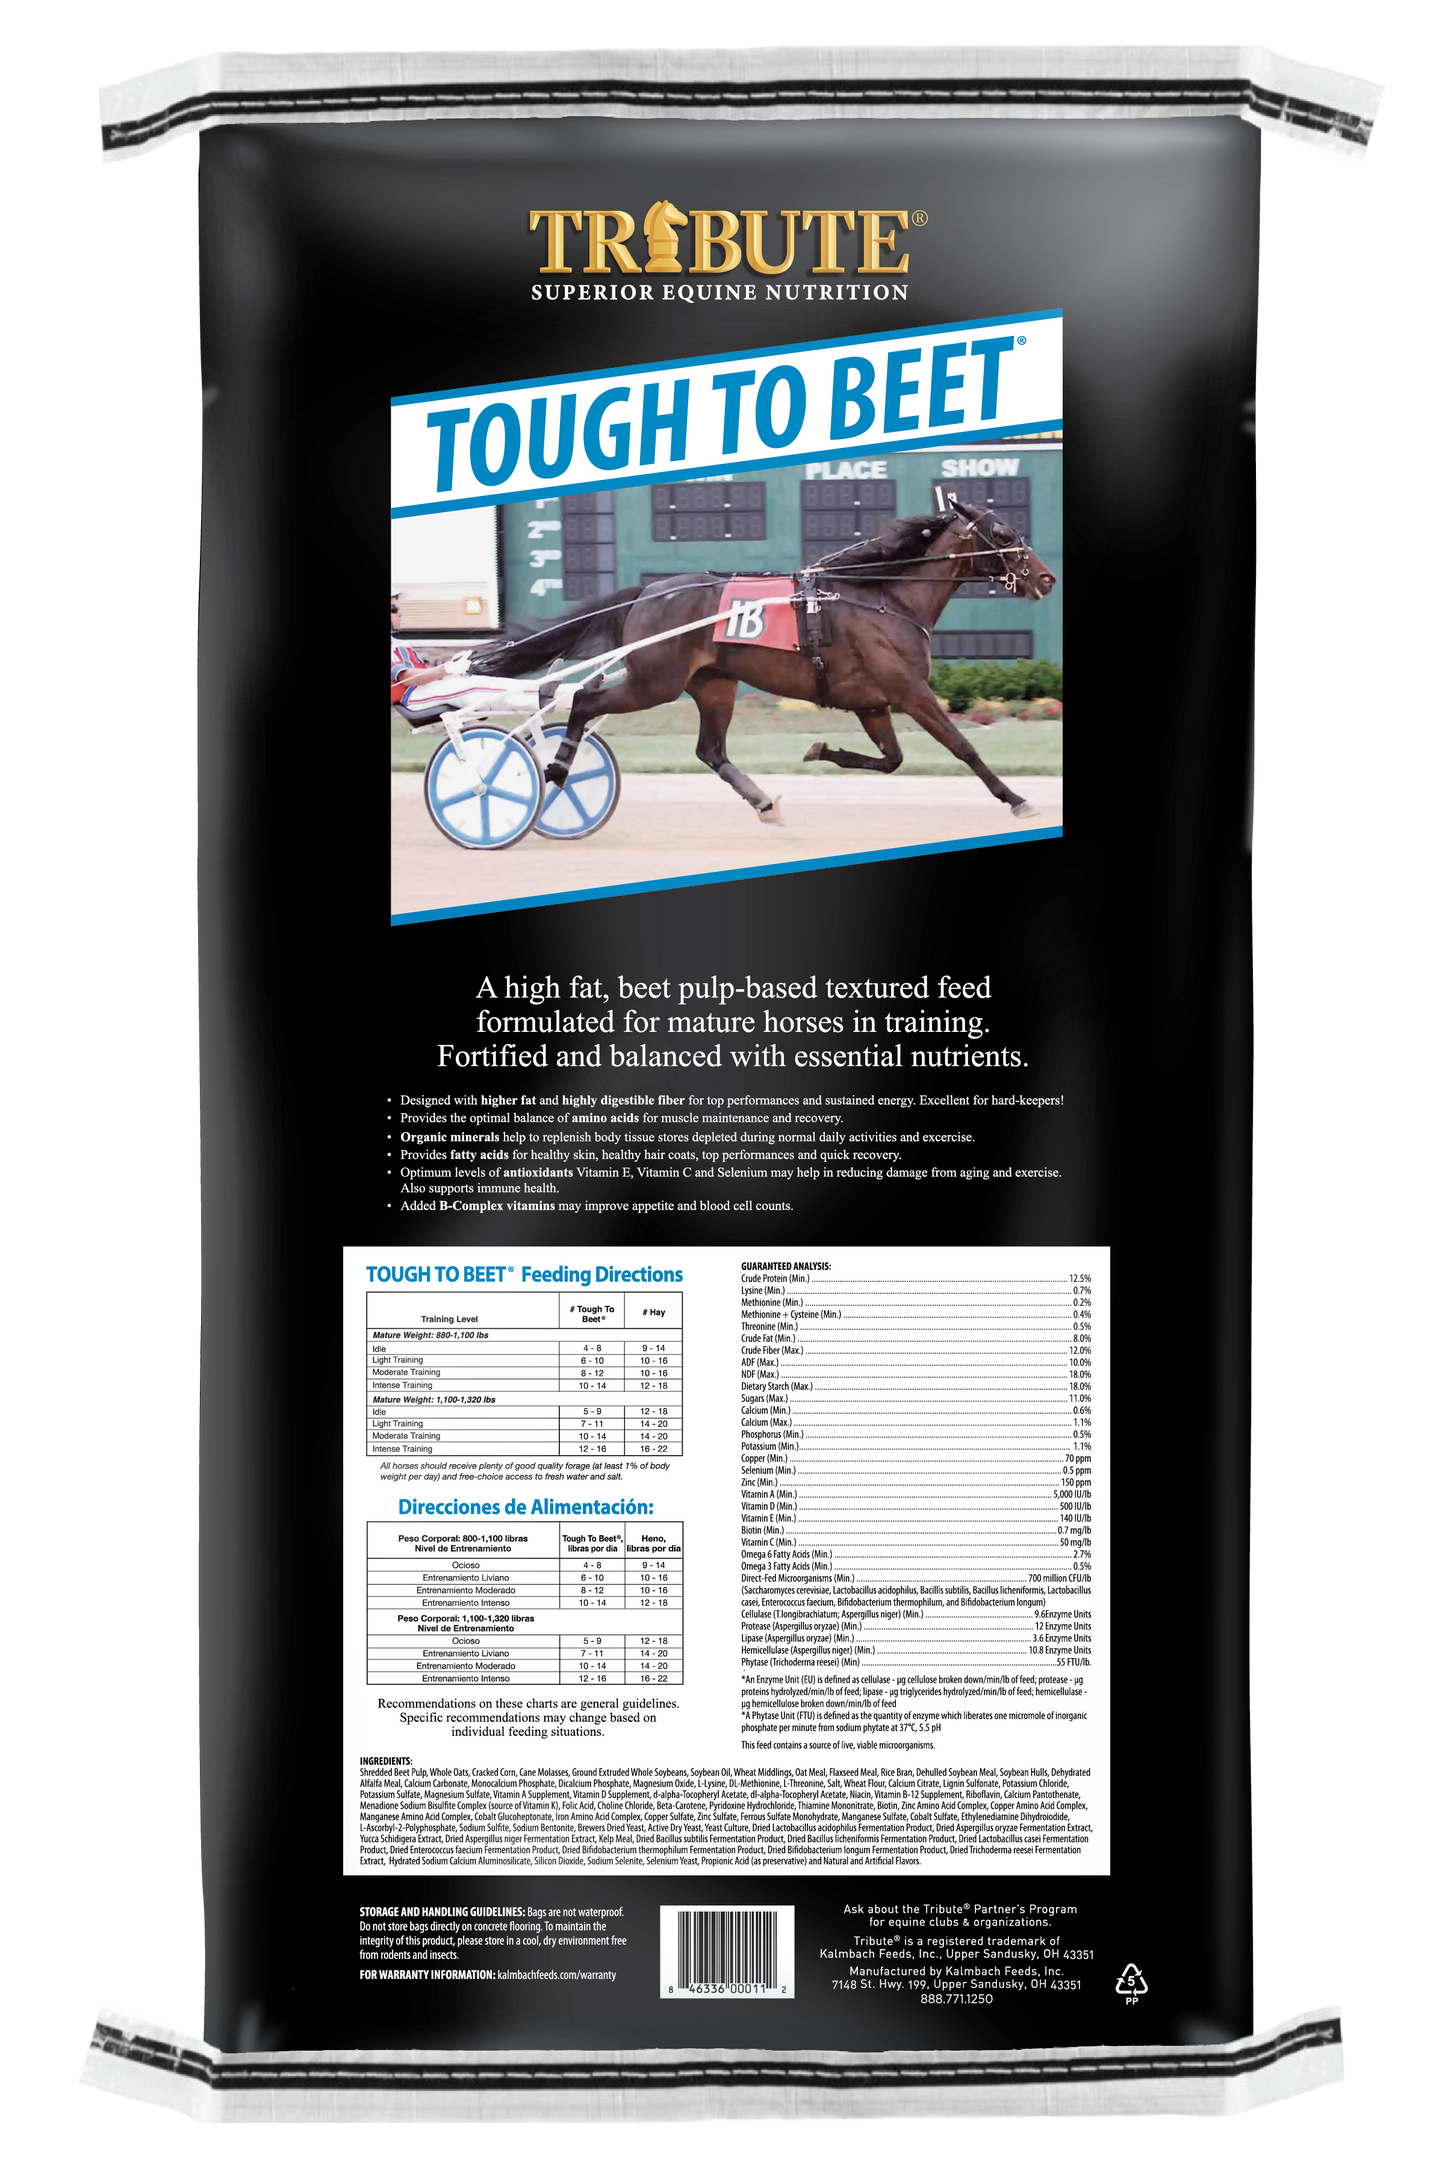 Tough To Beet® Horse Feed, Textured Feed for Race Horses